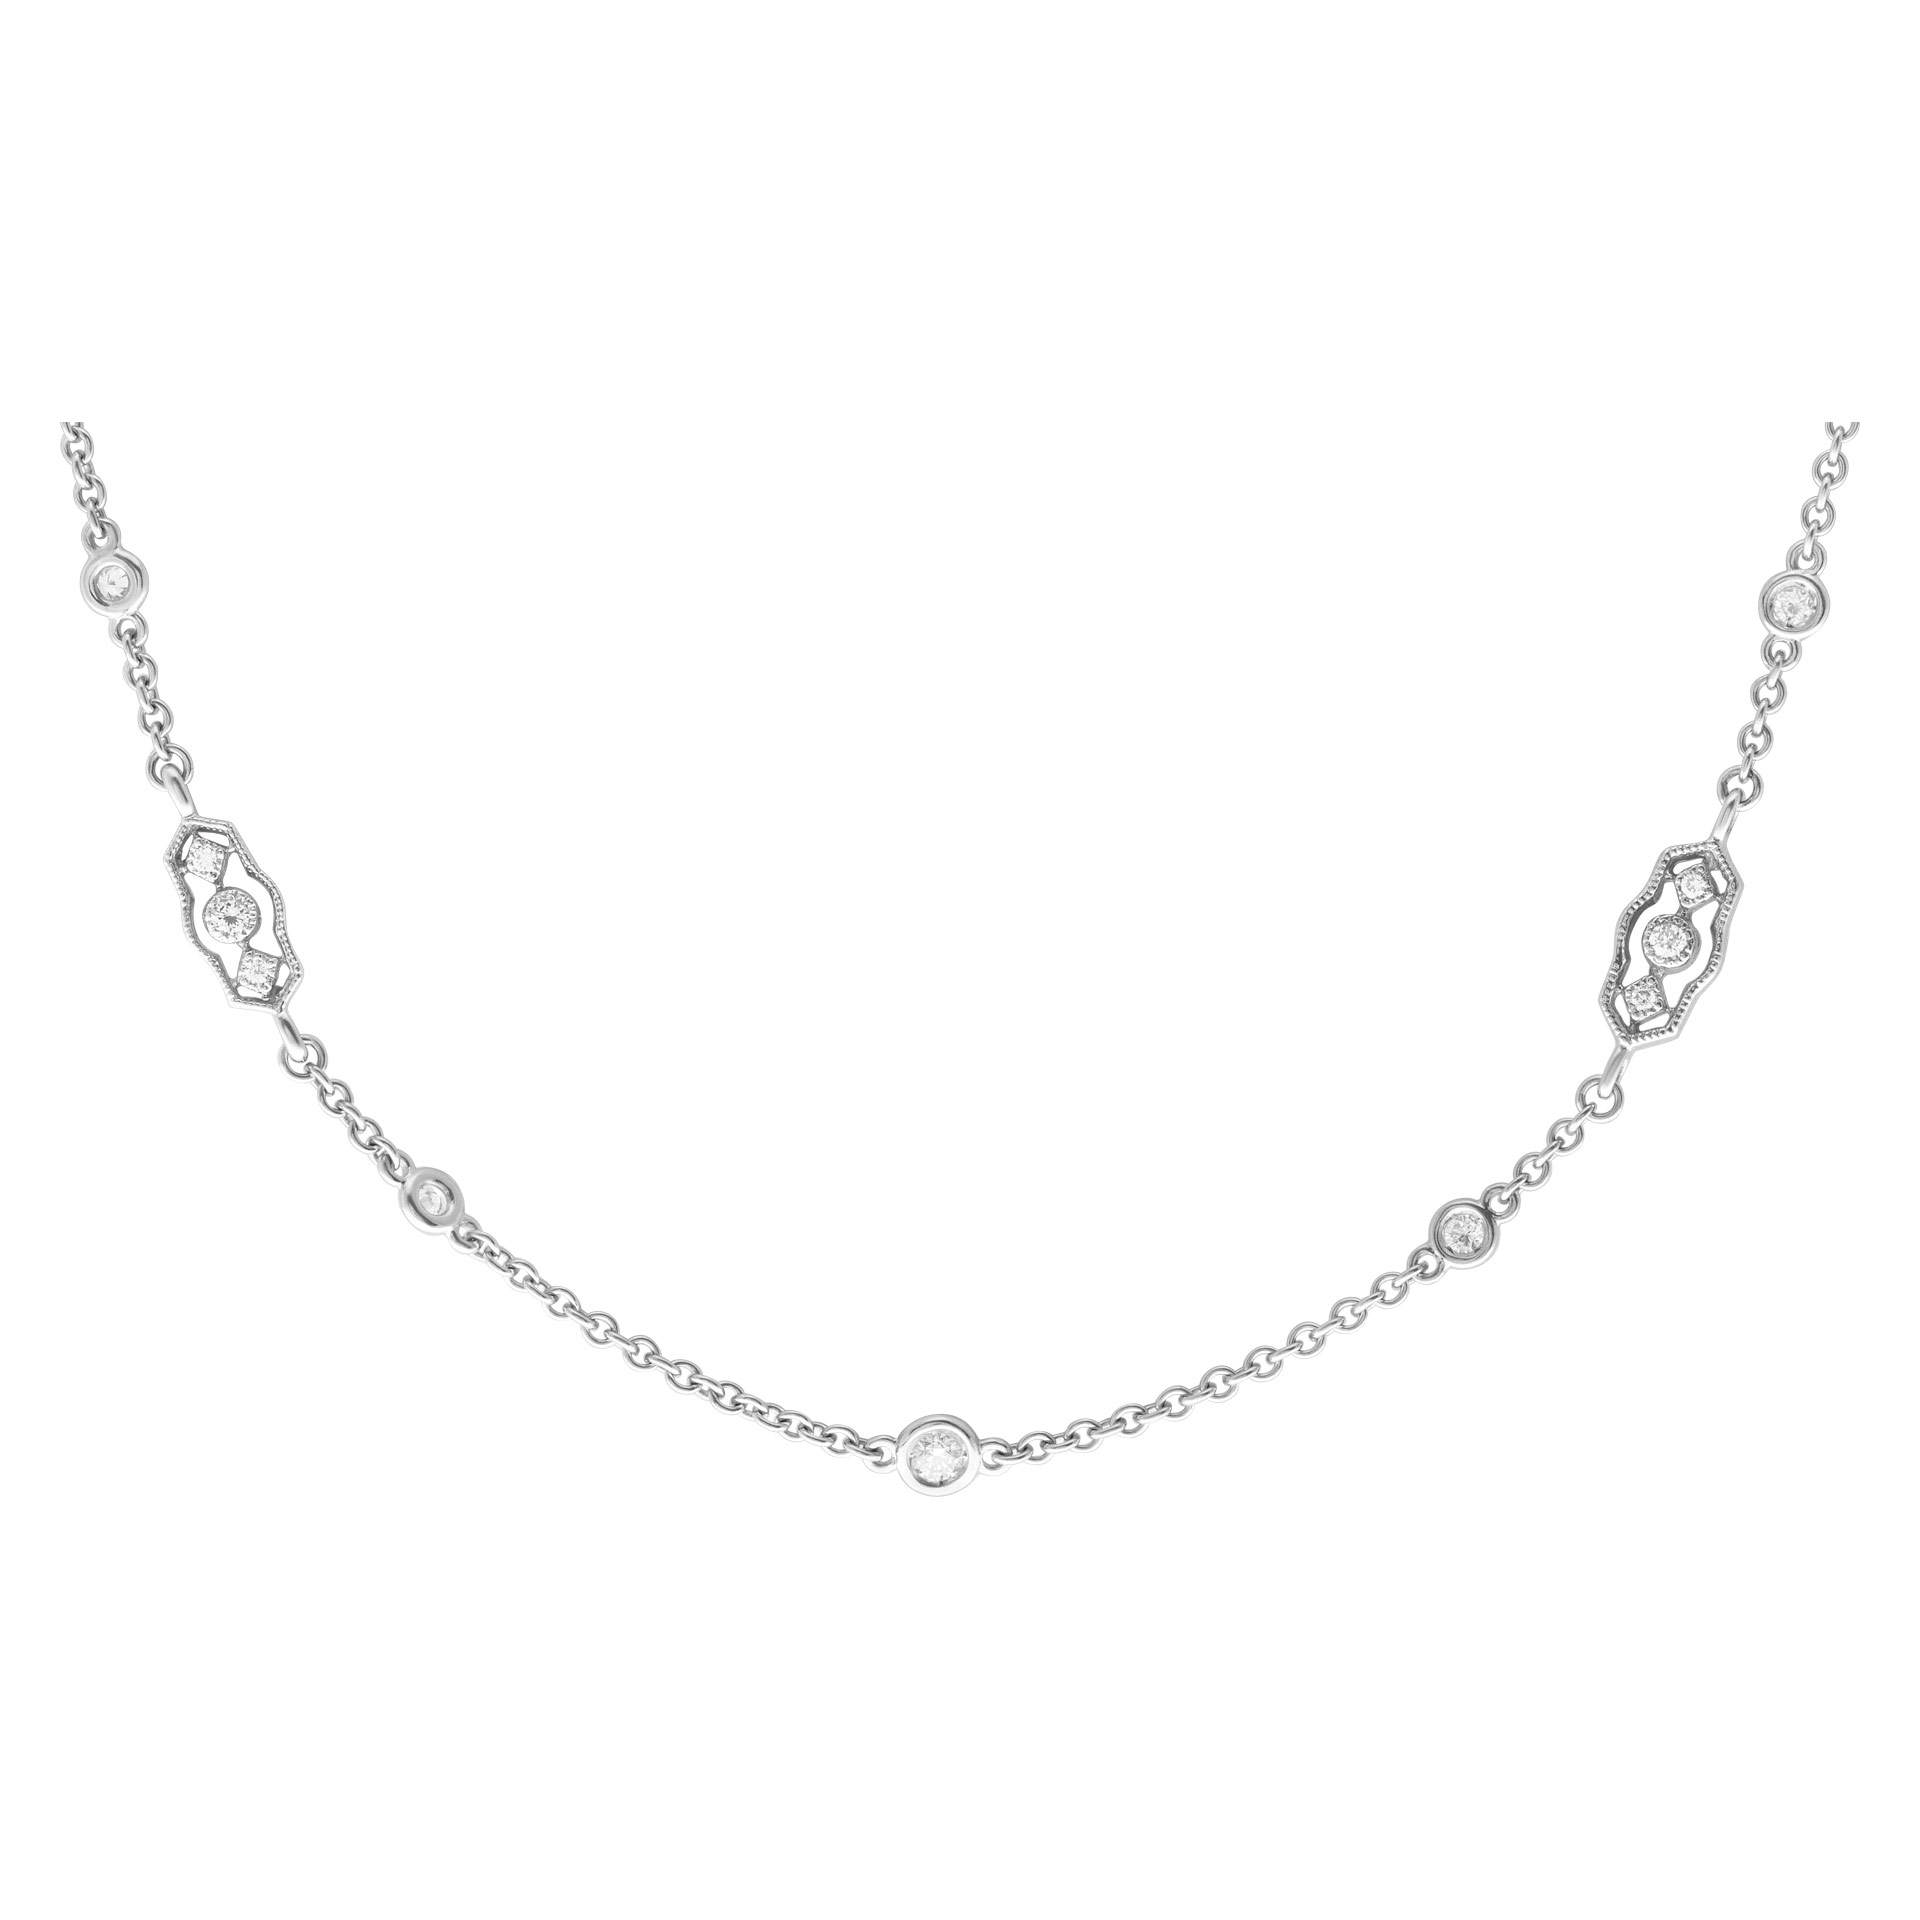 Diamonds by the yard necklace in 14k white gold with 2.78 cts image 1